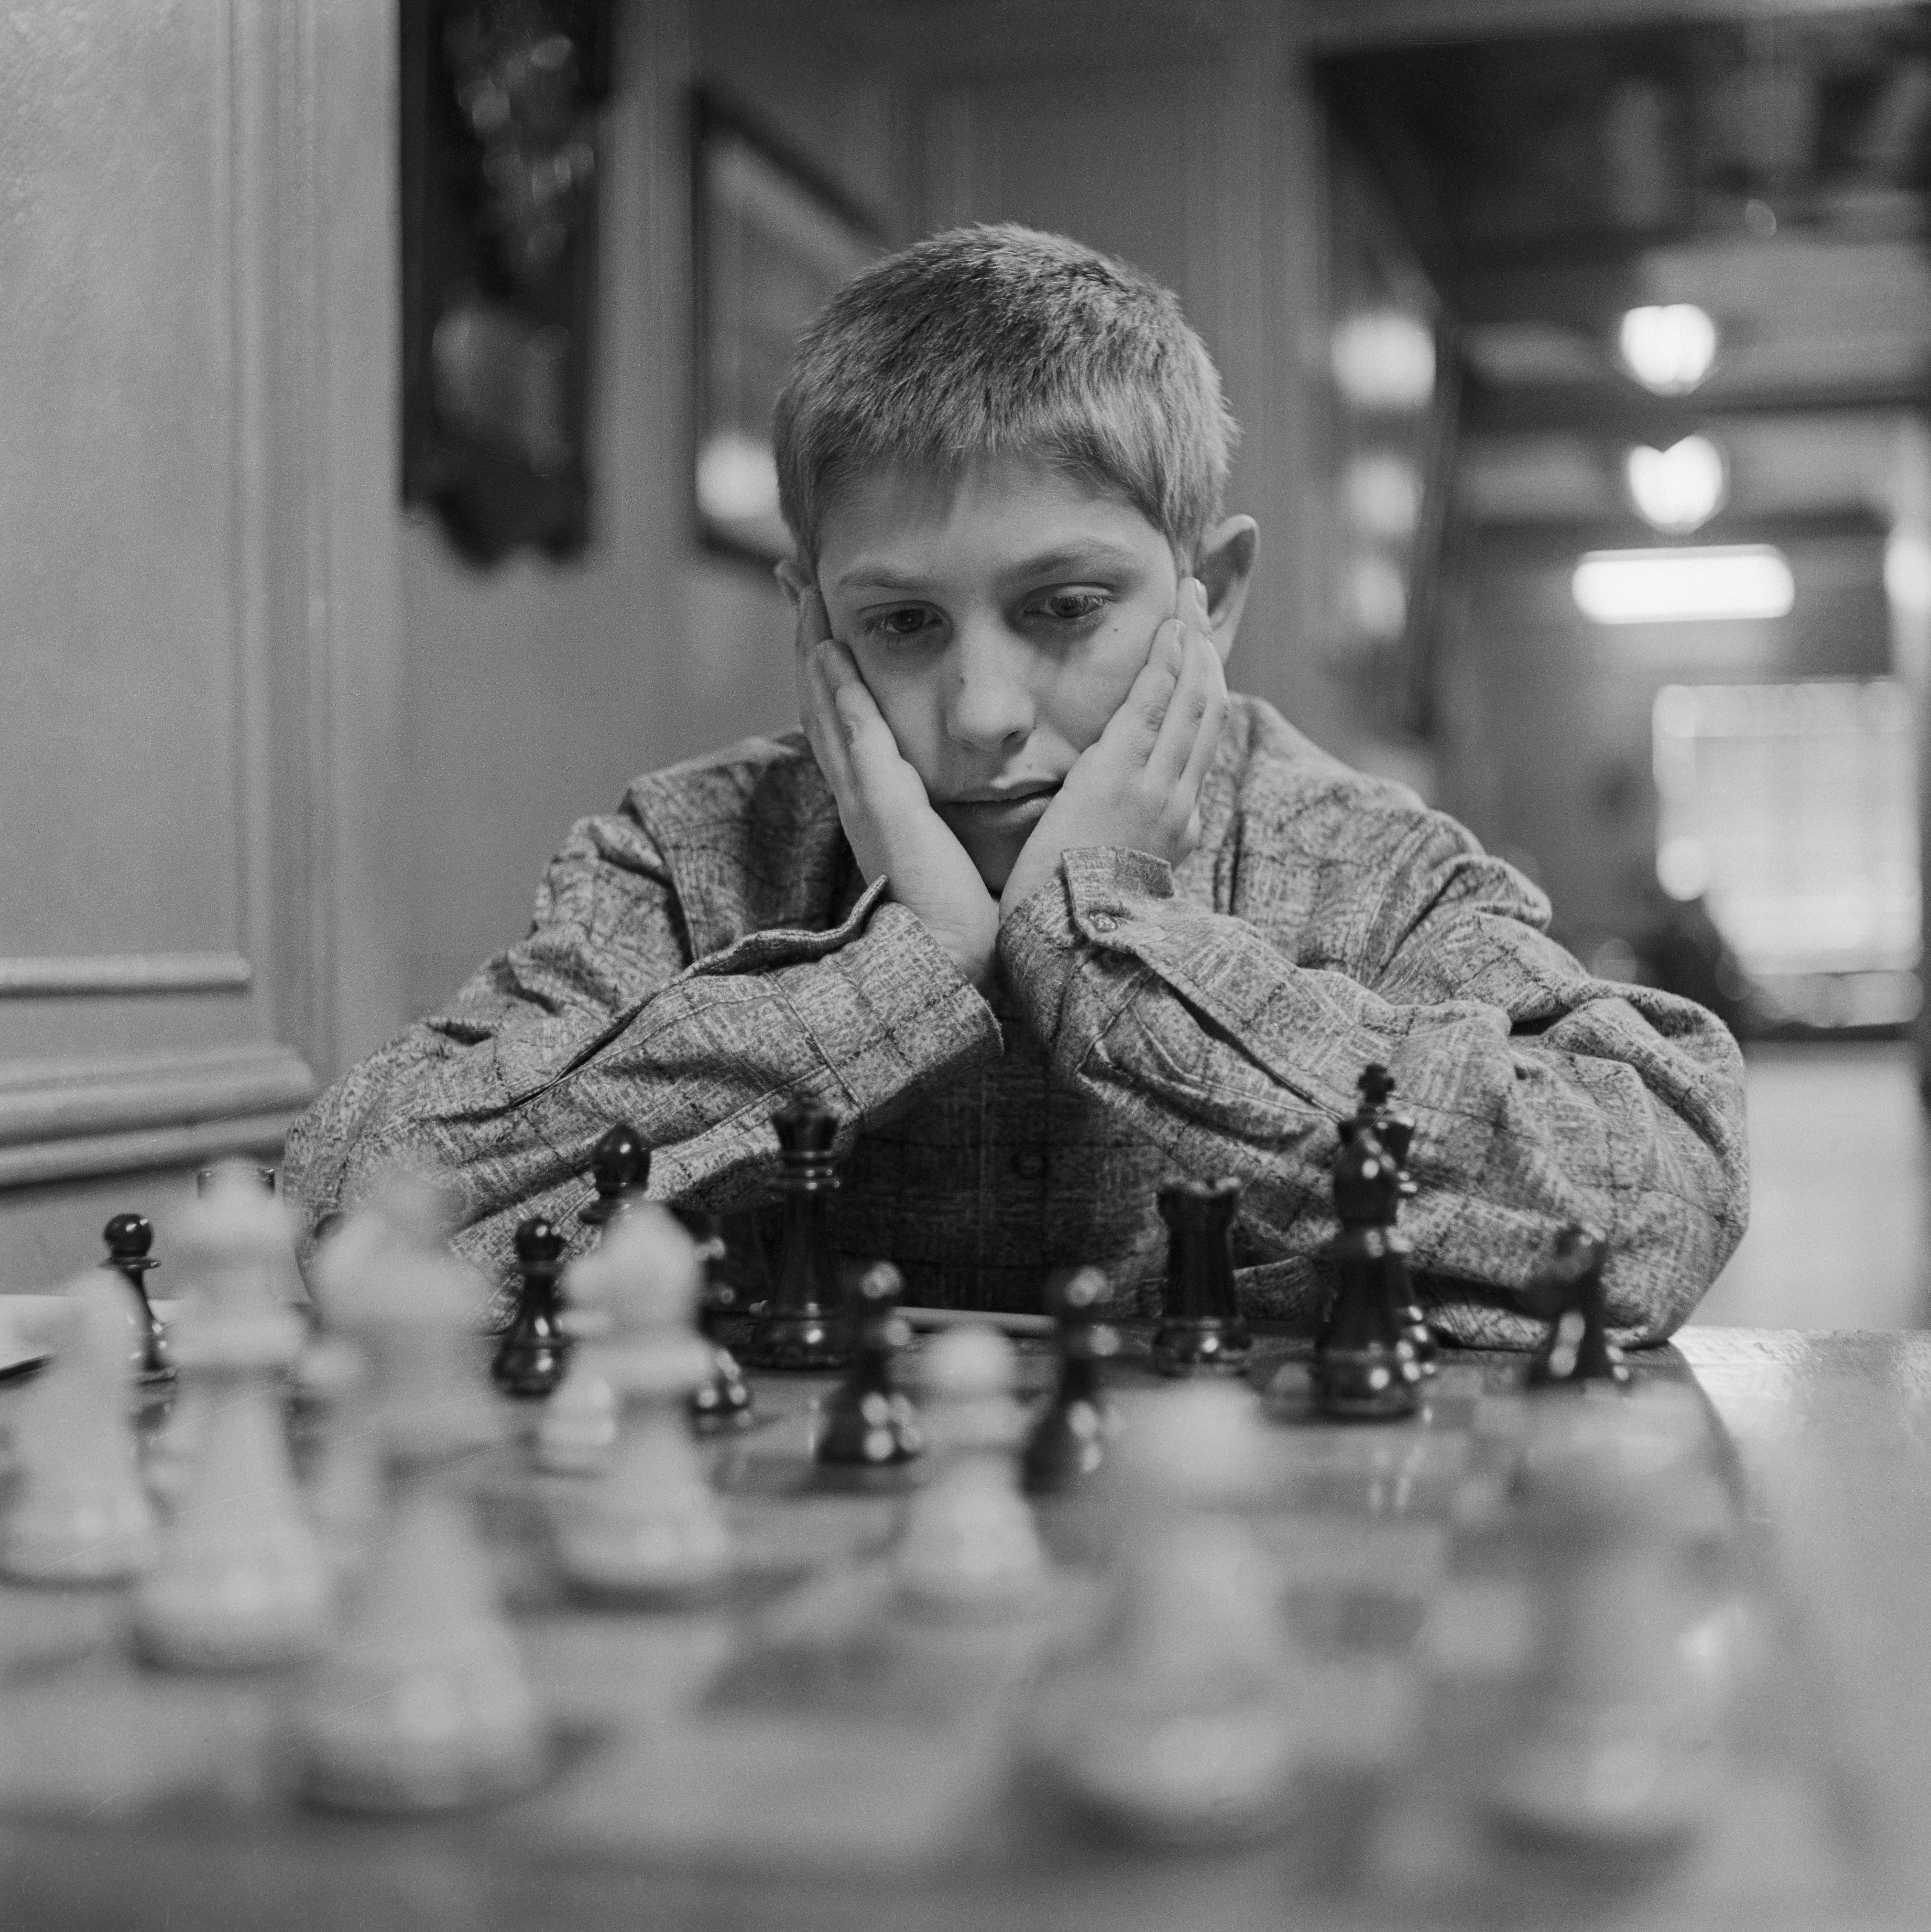 Why did Bobby Fischer never play Black in the Ruy Lopez opening